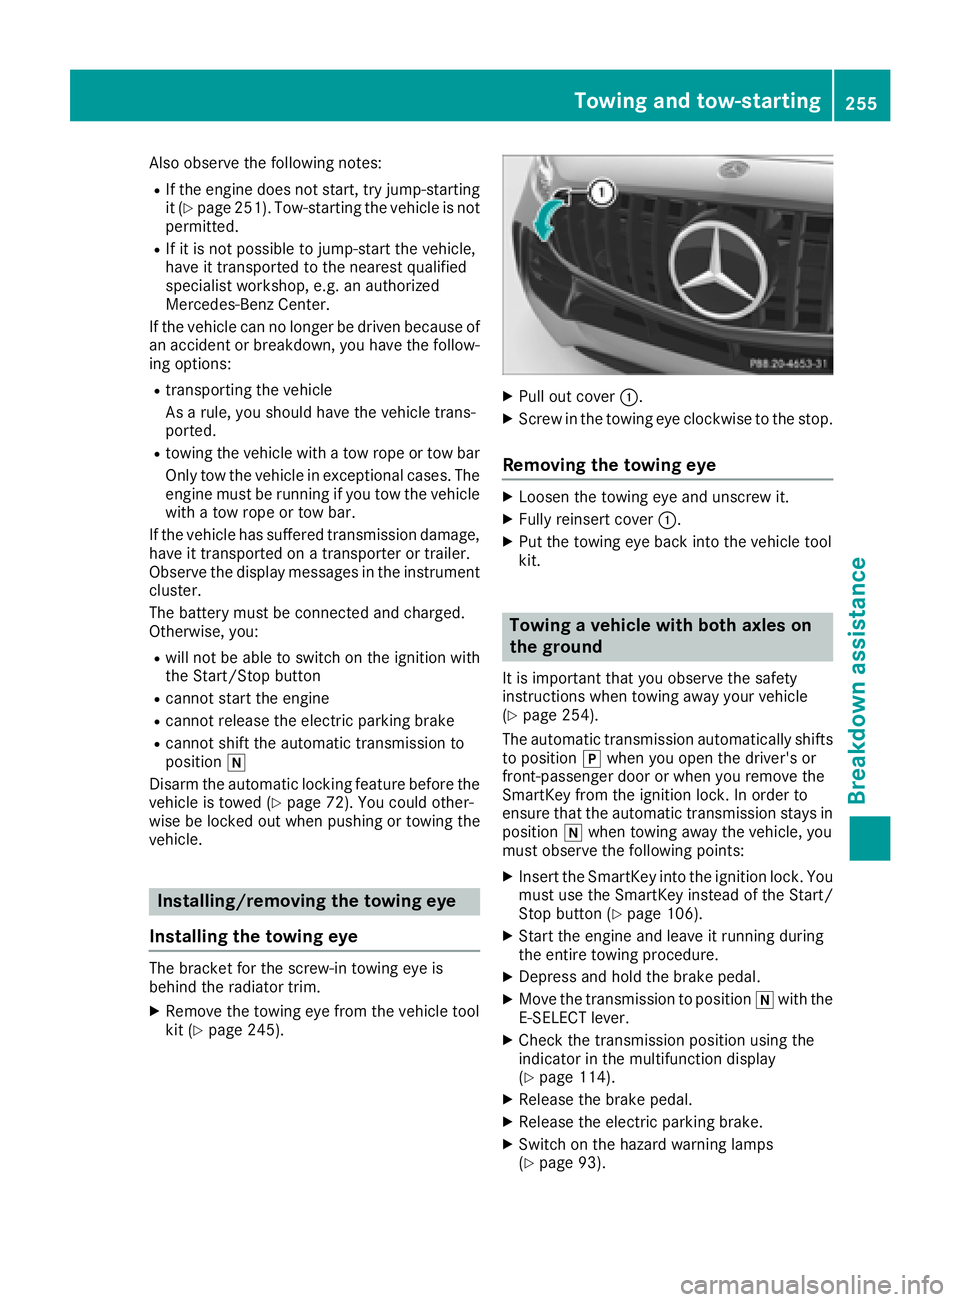 MERCEDES-BENZ AMG GT COUPE 2018  Owners Manual Also observe the following notes:
RIf the engine does not start, try jump-starting
it (Ypage 251). Tow-starting the vehicle is not
permitted.
RIf it is not possible to jump-start the vehicle,
have it 